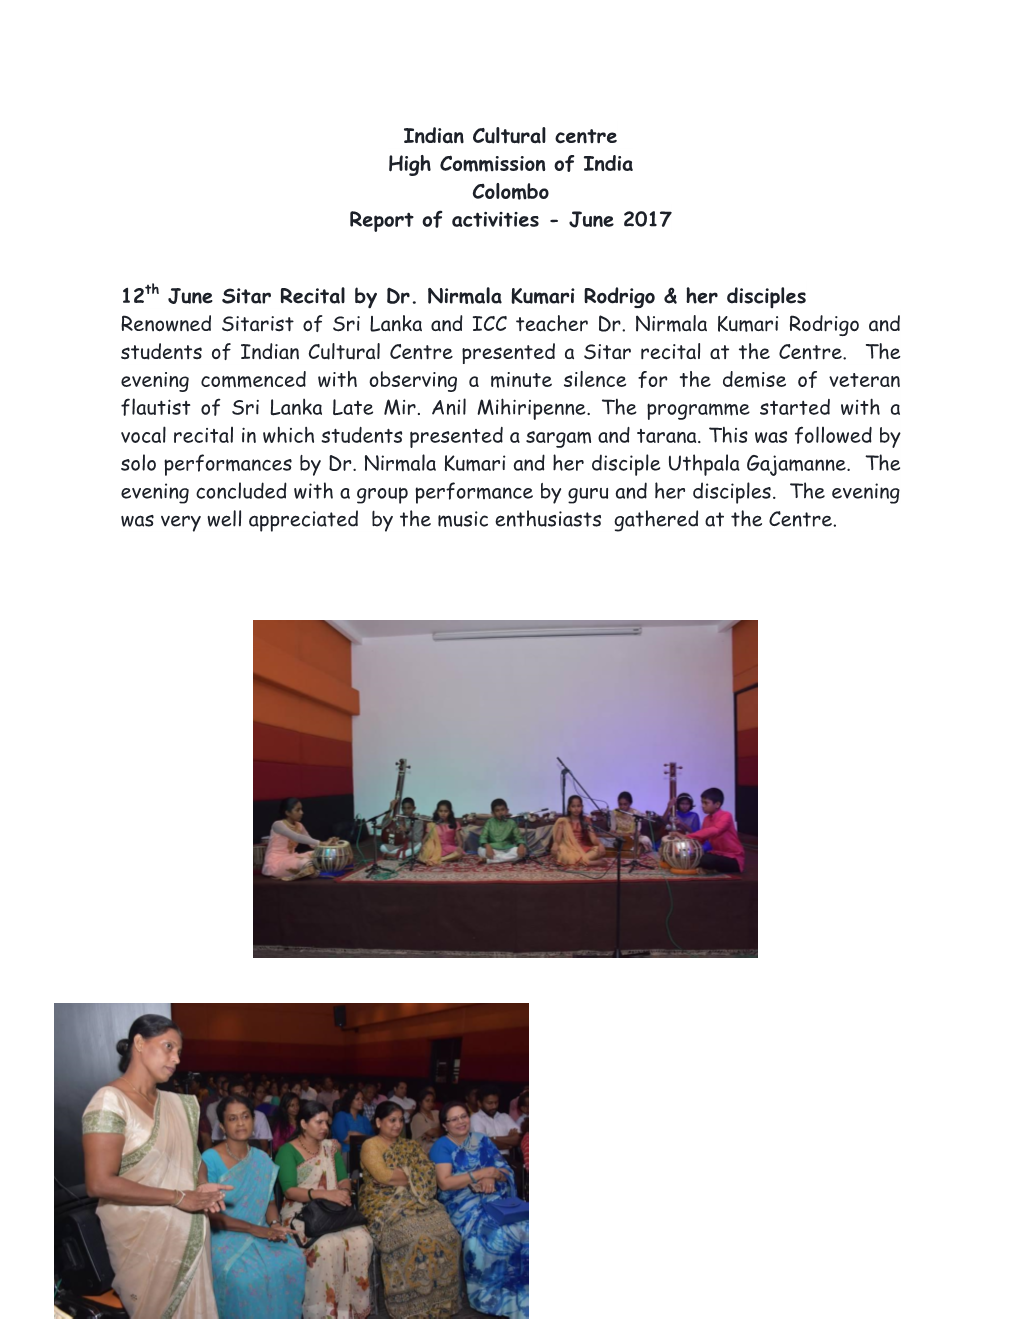 Indian Cultural Centre High Commission of India Colombo Report of Activities - June 2017